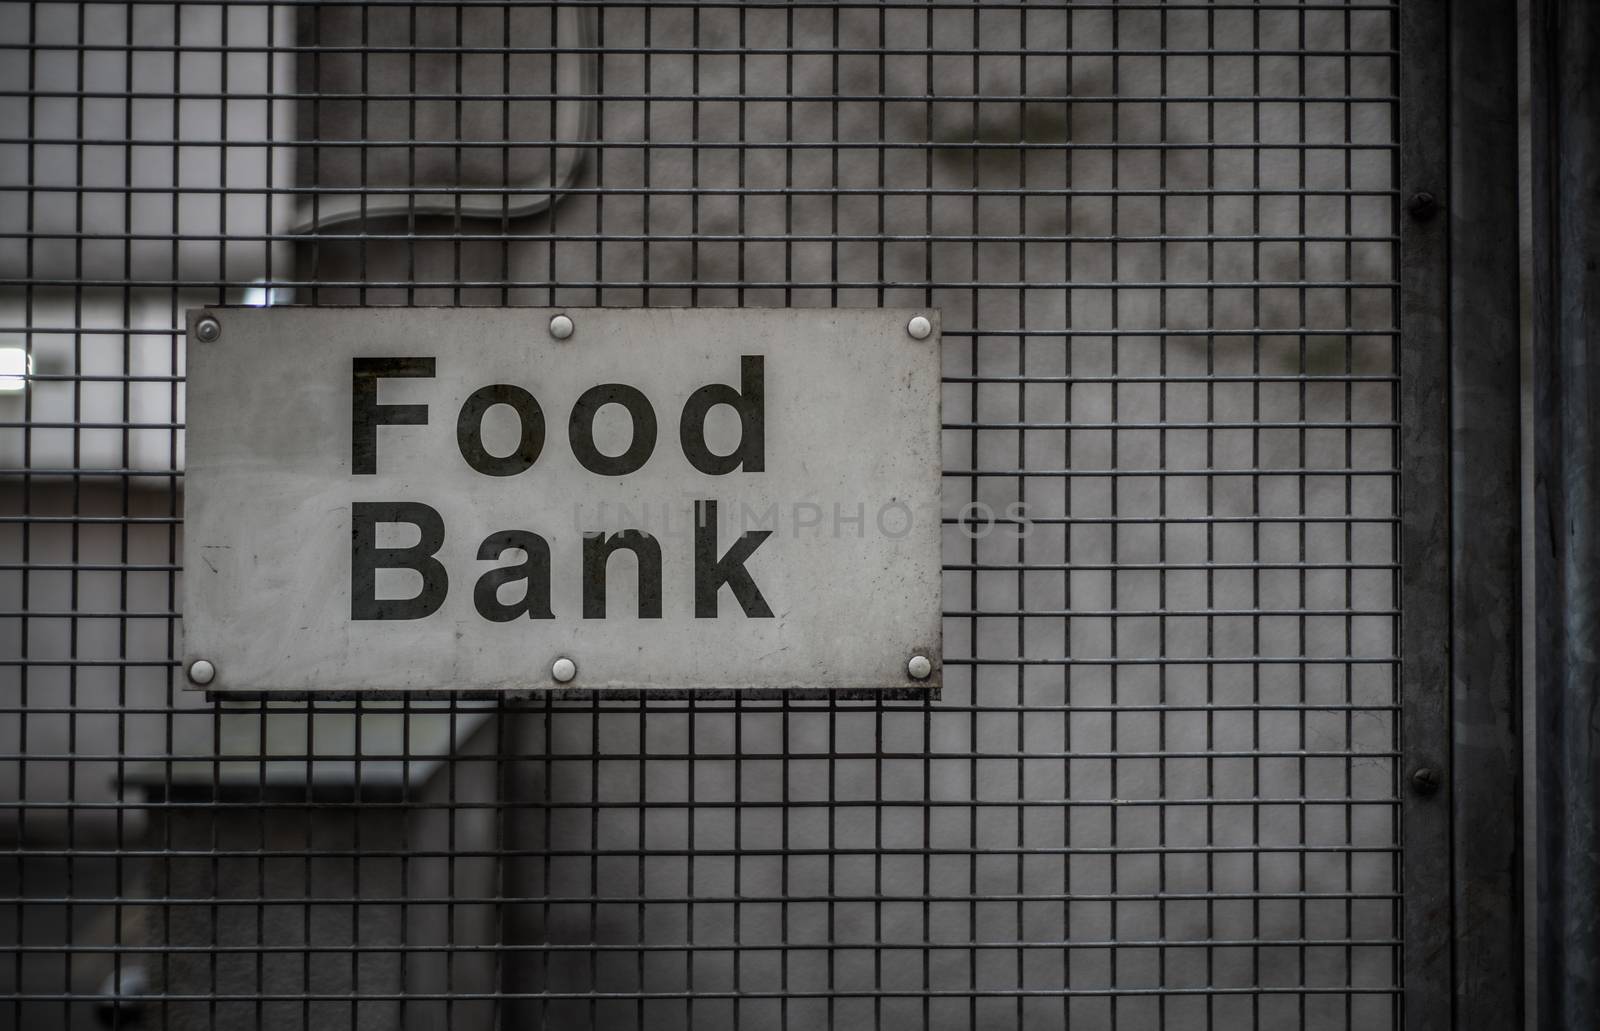 A Grungy Sign For A Food Bank In A Backstreet